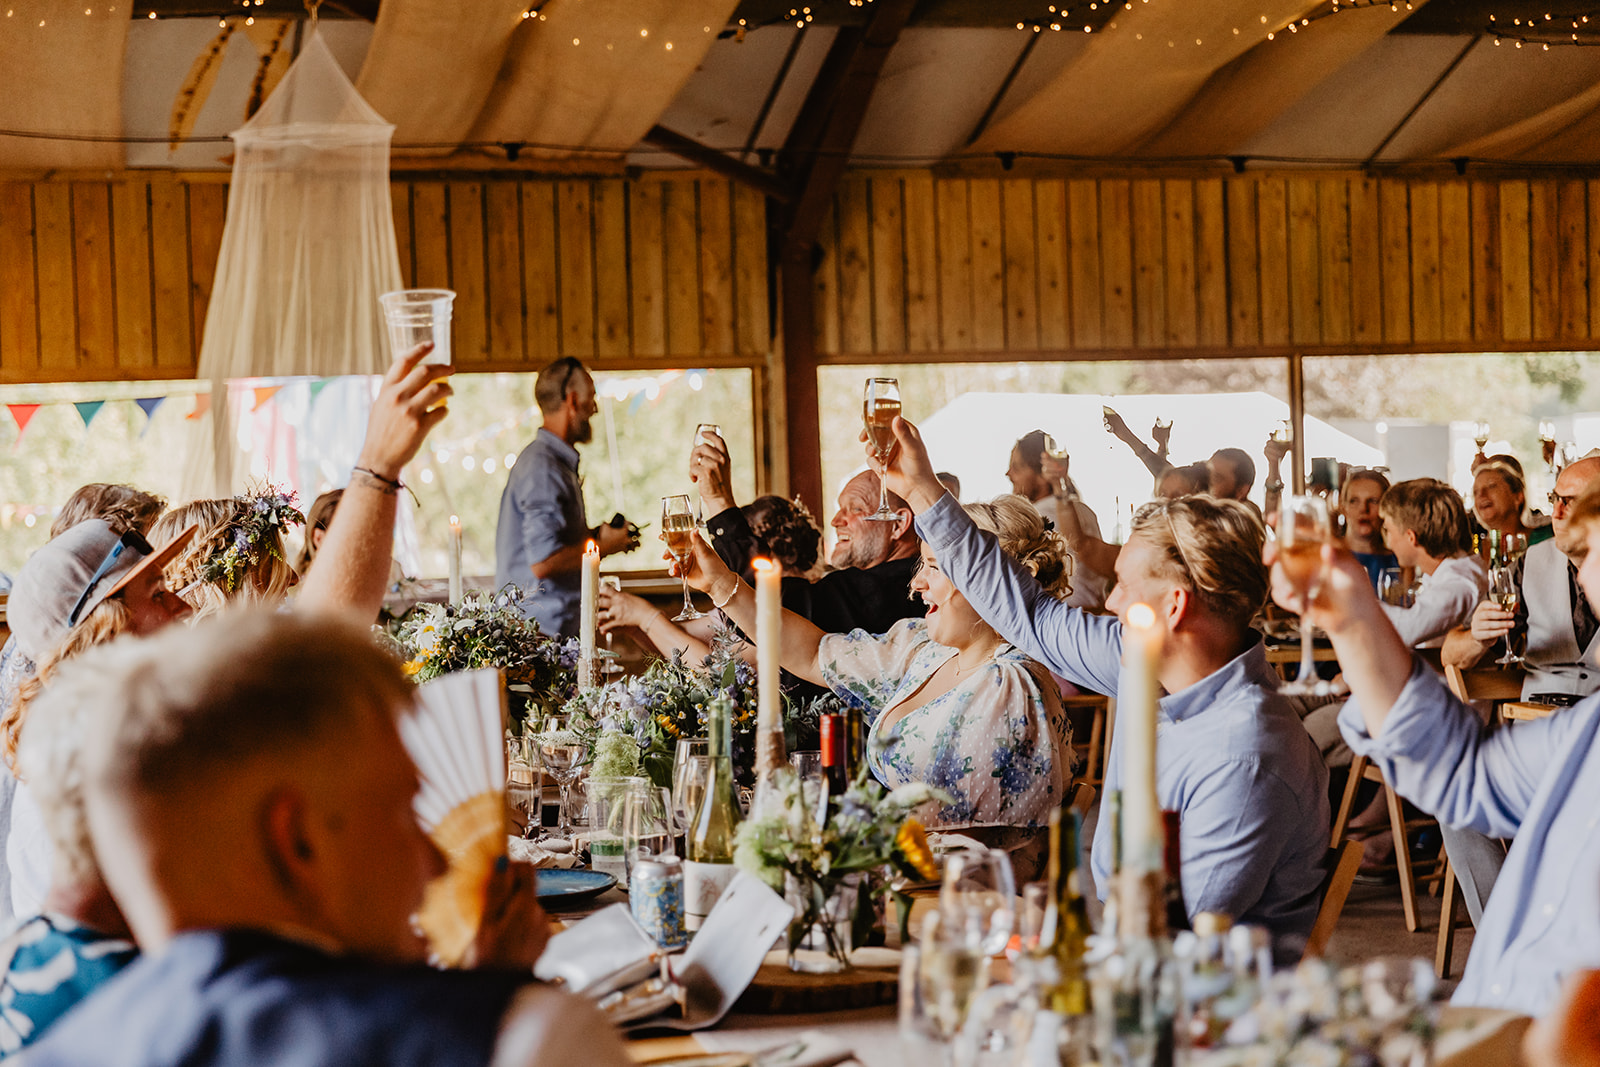 Wedding speeches at a wedding at Mac's Farm in Sussex. By OliveJoy Photography.